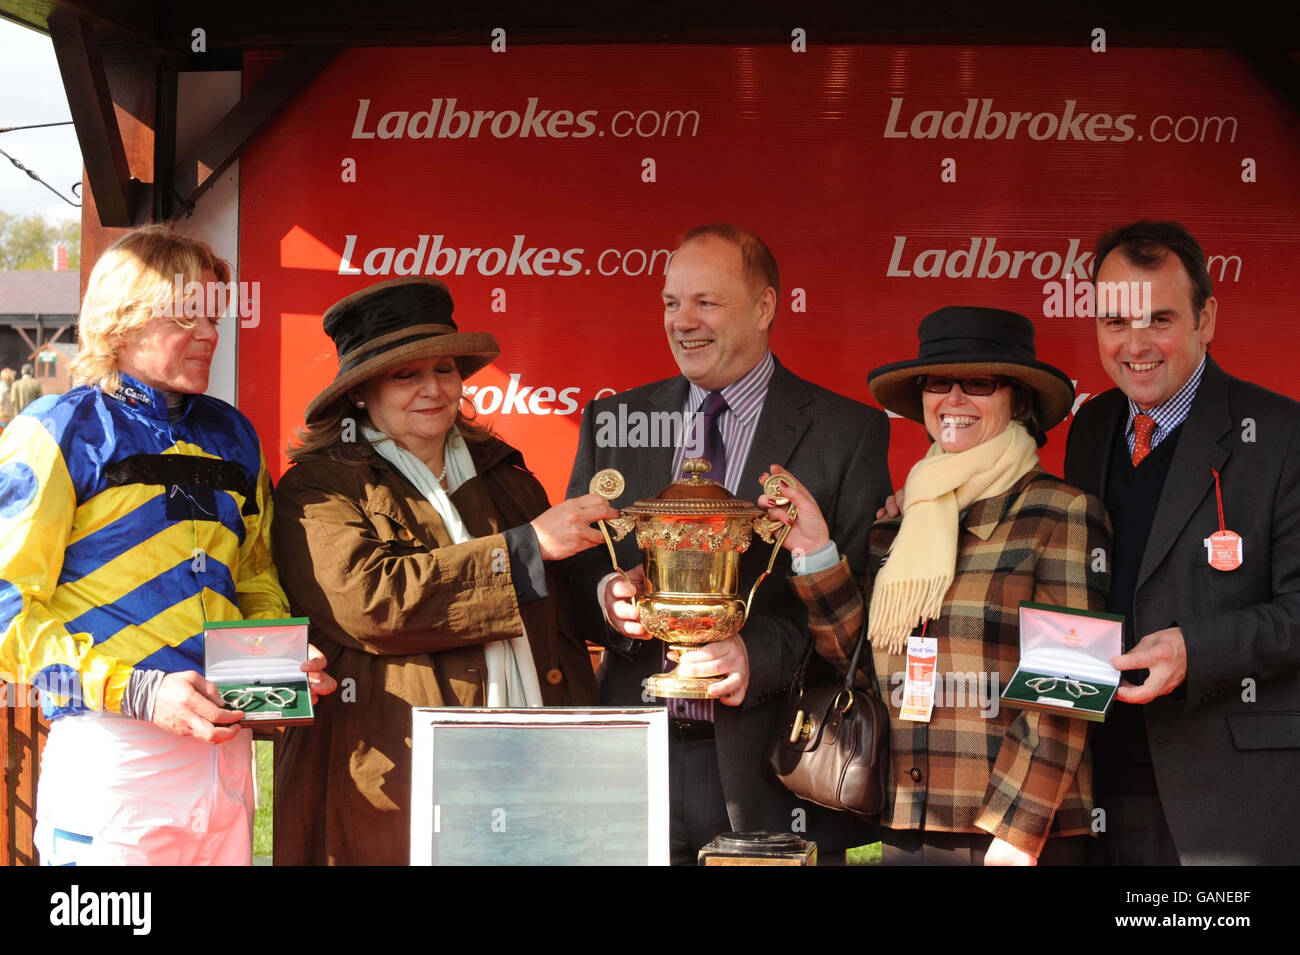 (Left to Right) Robert Thornton, Caroline Caddick of the owners syndicate Three Line Whip, Joe Lewins from Ladbrokes Ireland, Lesley Field of Three Line Whip syndicate and trainer Alan King after Blazing Bailey won the Ladbrokes.com World Series Hurdle during the 2008 National Hunt Festival at Punchestown Racecourse, Ireland. Stock Photo